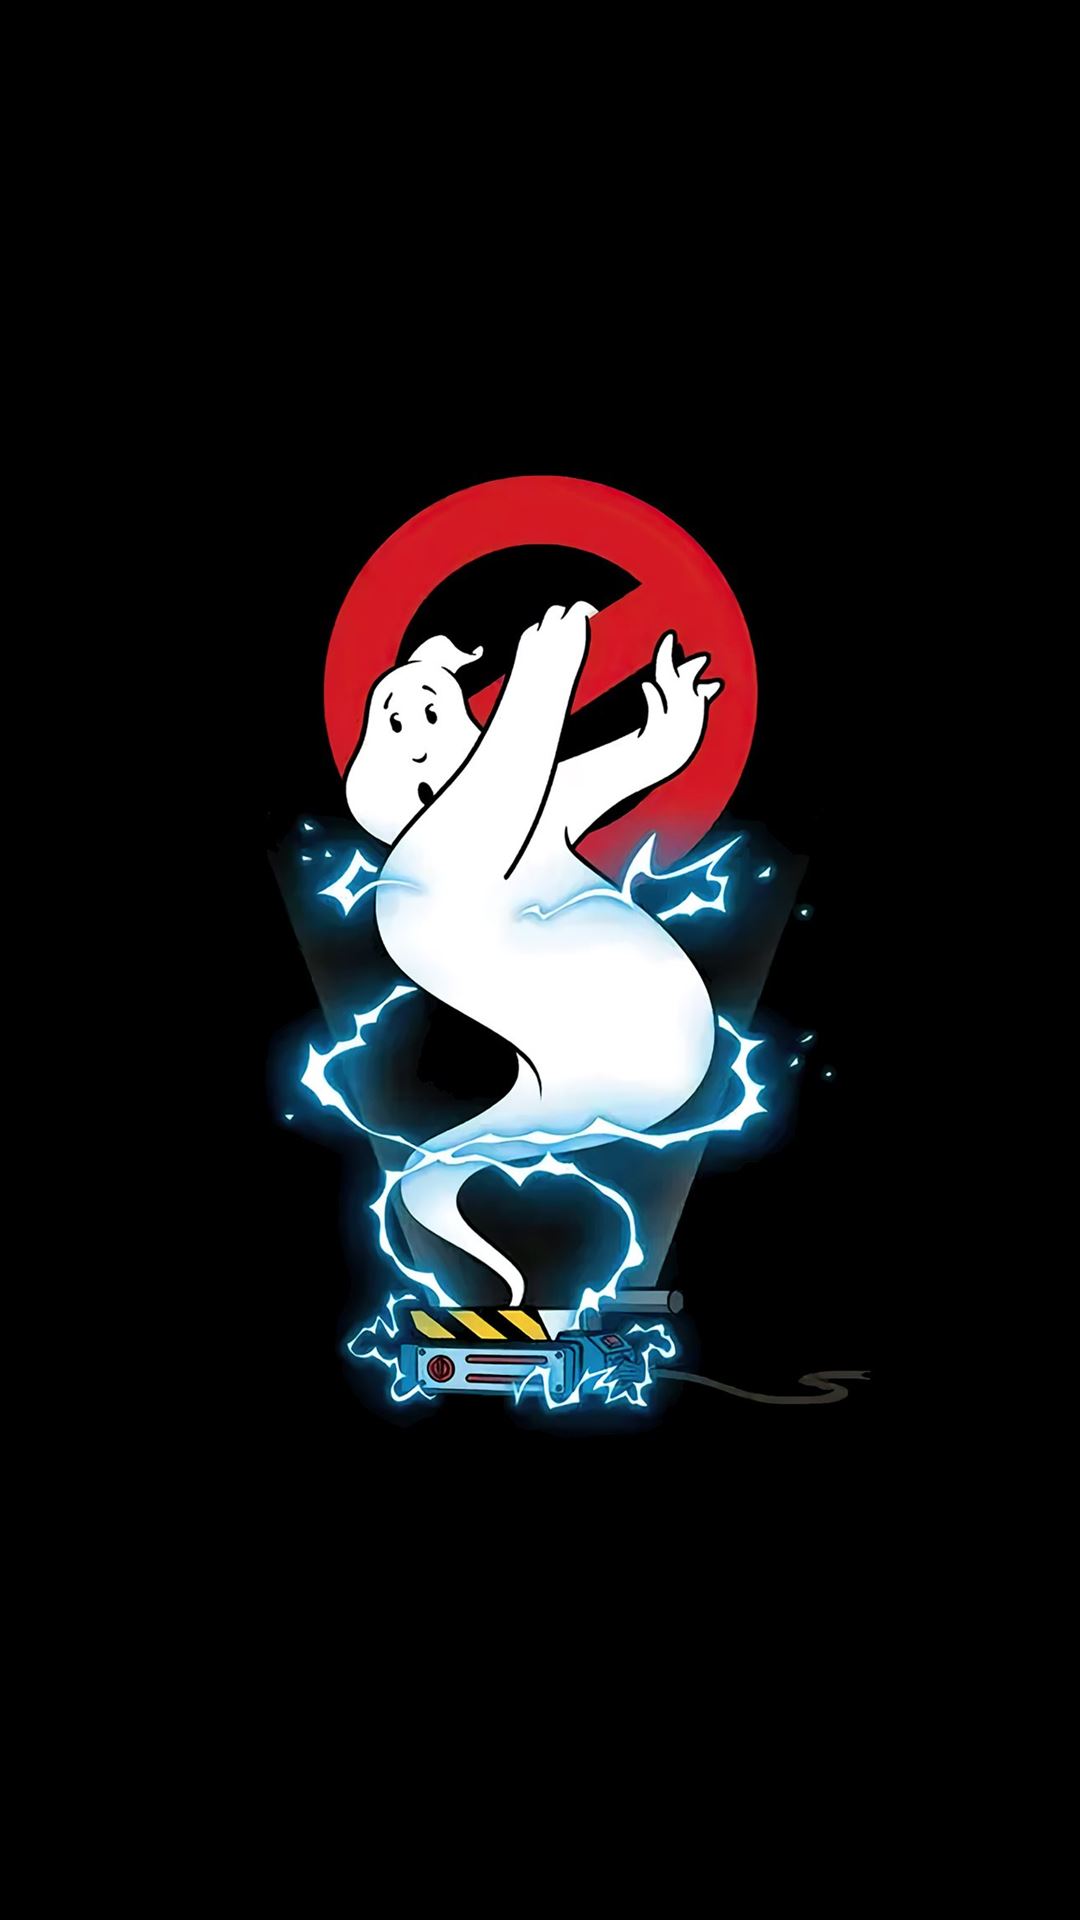 Wallpaper Ghostbusters Springfield Museums Slimer Stay Puft Marshmallow  Man Proton Pack Background  Download Free Image